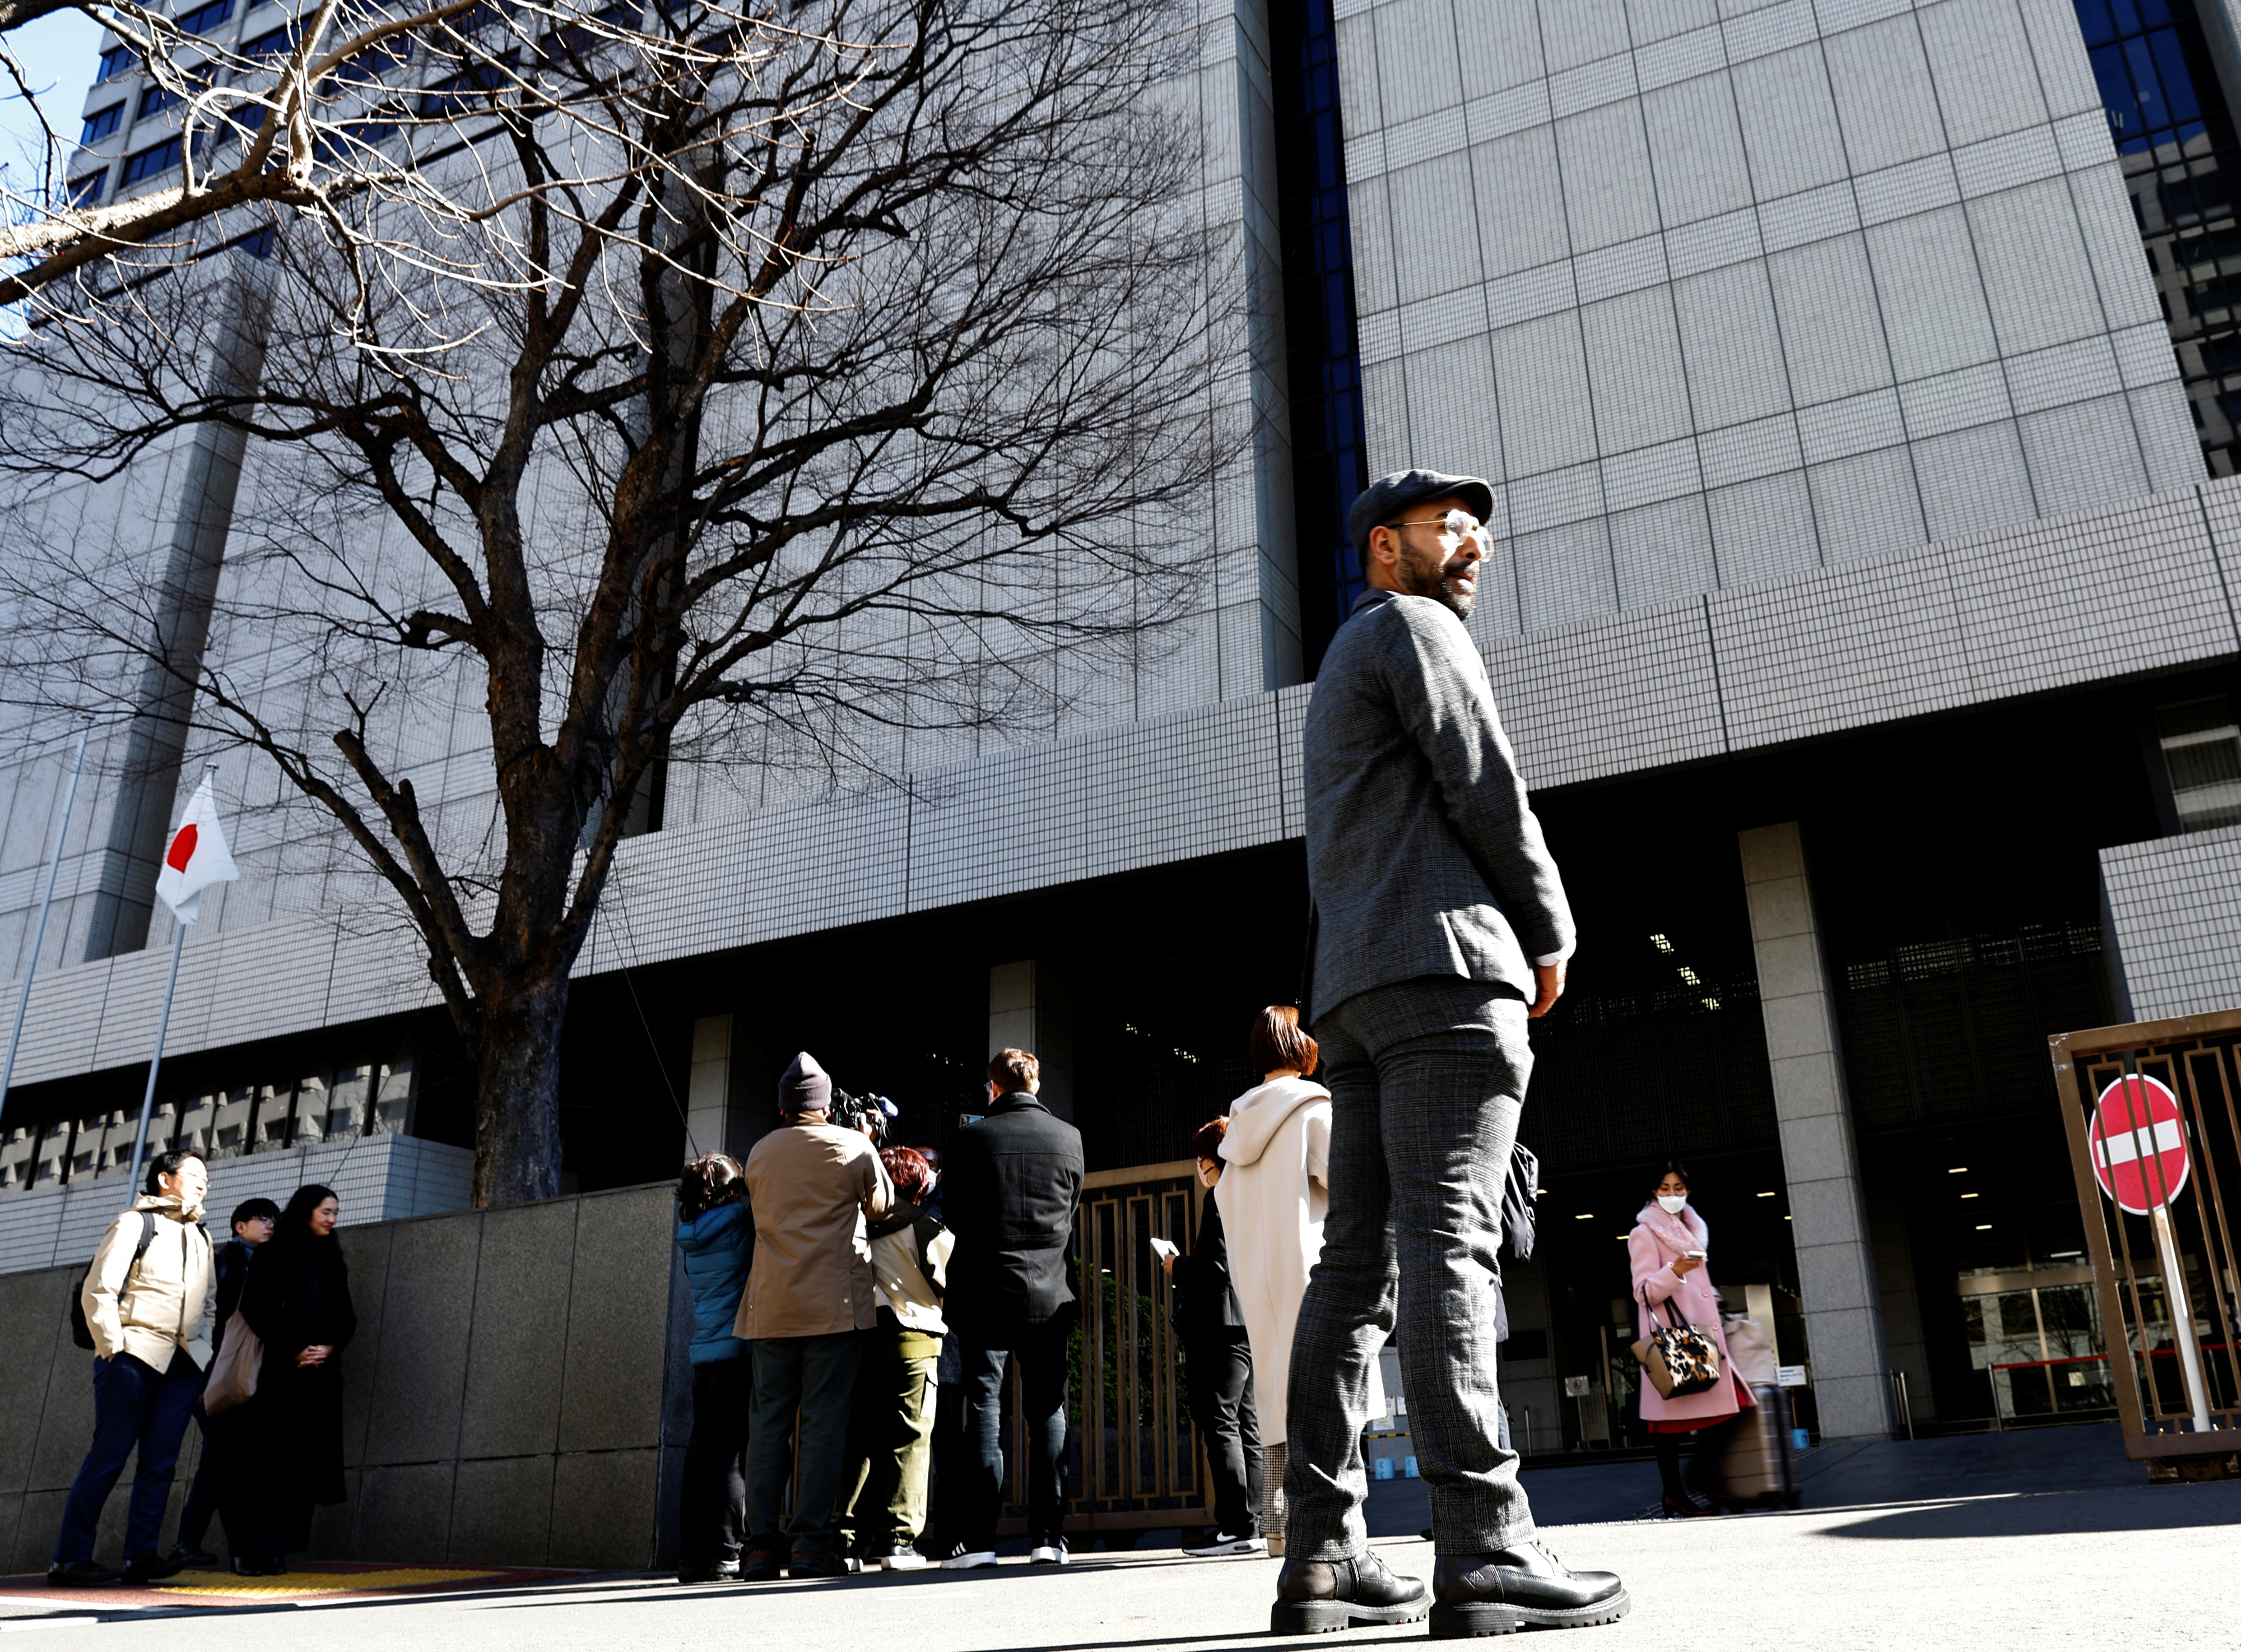 Foreign-born residents of Japan filed a lawsuit against the national and local governments over alleged illegal questioning by police based on racial profilingin Tokyo